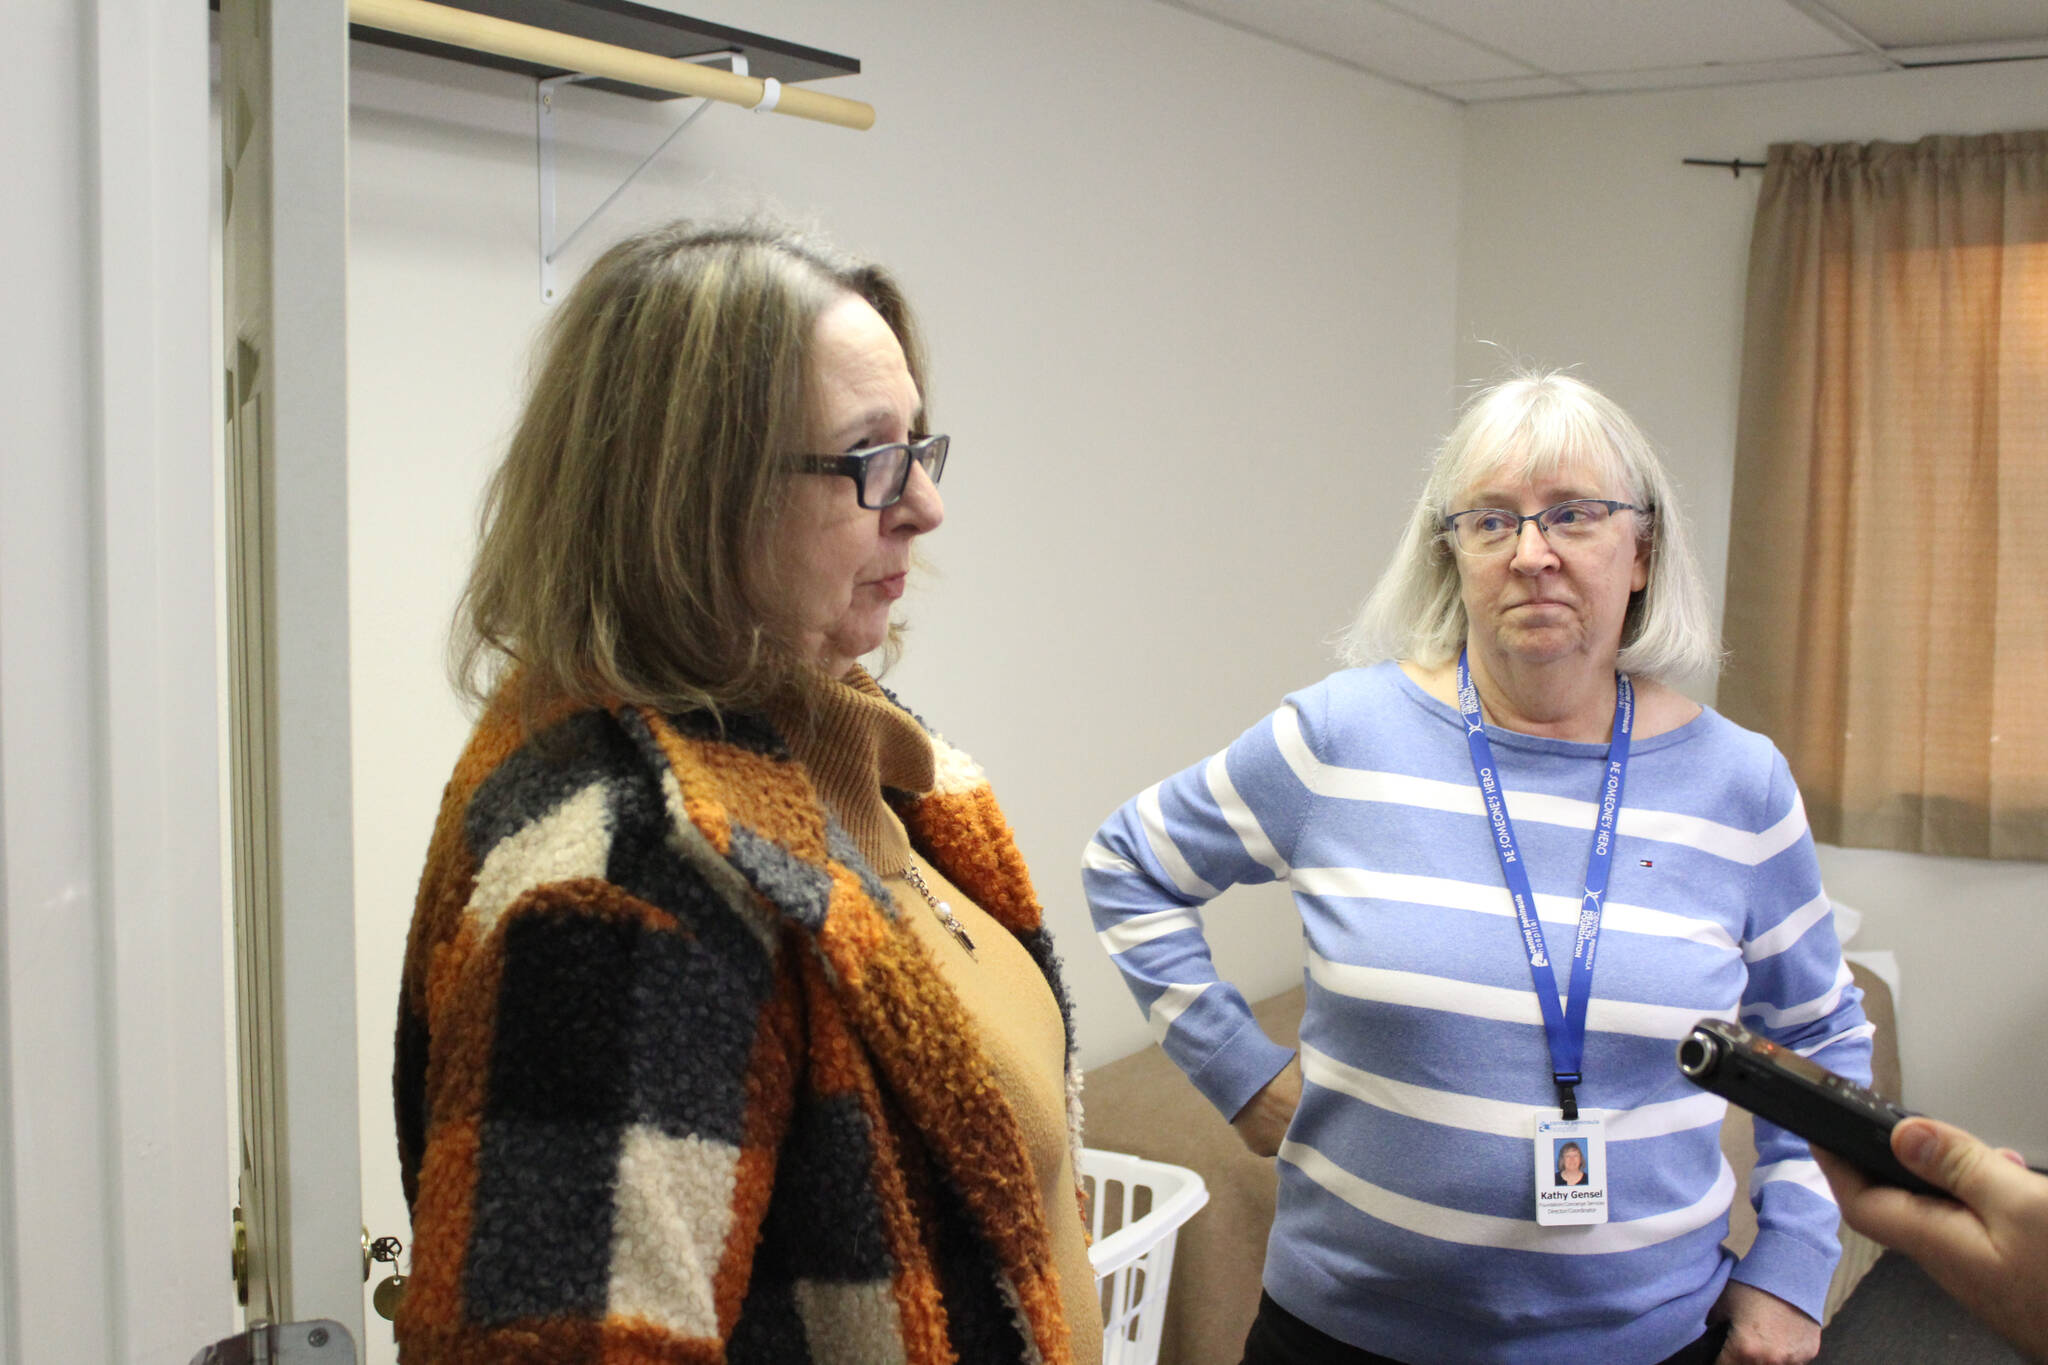 Leslie Rohr, executive director of Love INC, (left) and Kathy Gensel, president of Bridges Community Resource Network, Inc., field questions from reporters during a tour of the recently opened cold weather shelter in Nikiski, on Monday, Nov. 22, 2021, in Nikiski, Alaska.